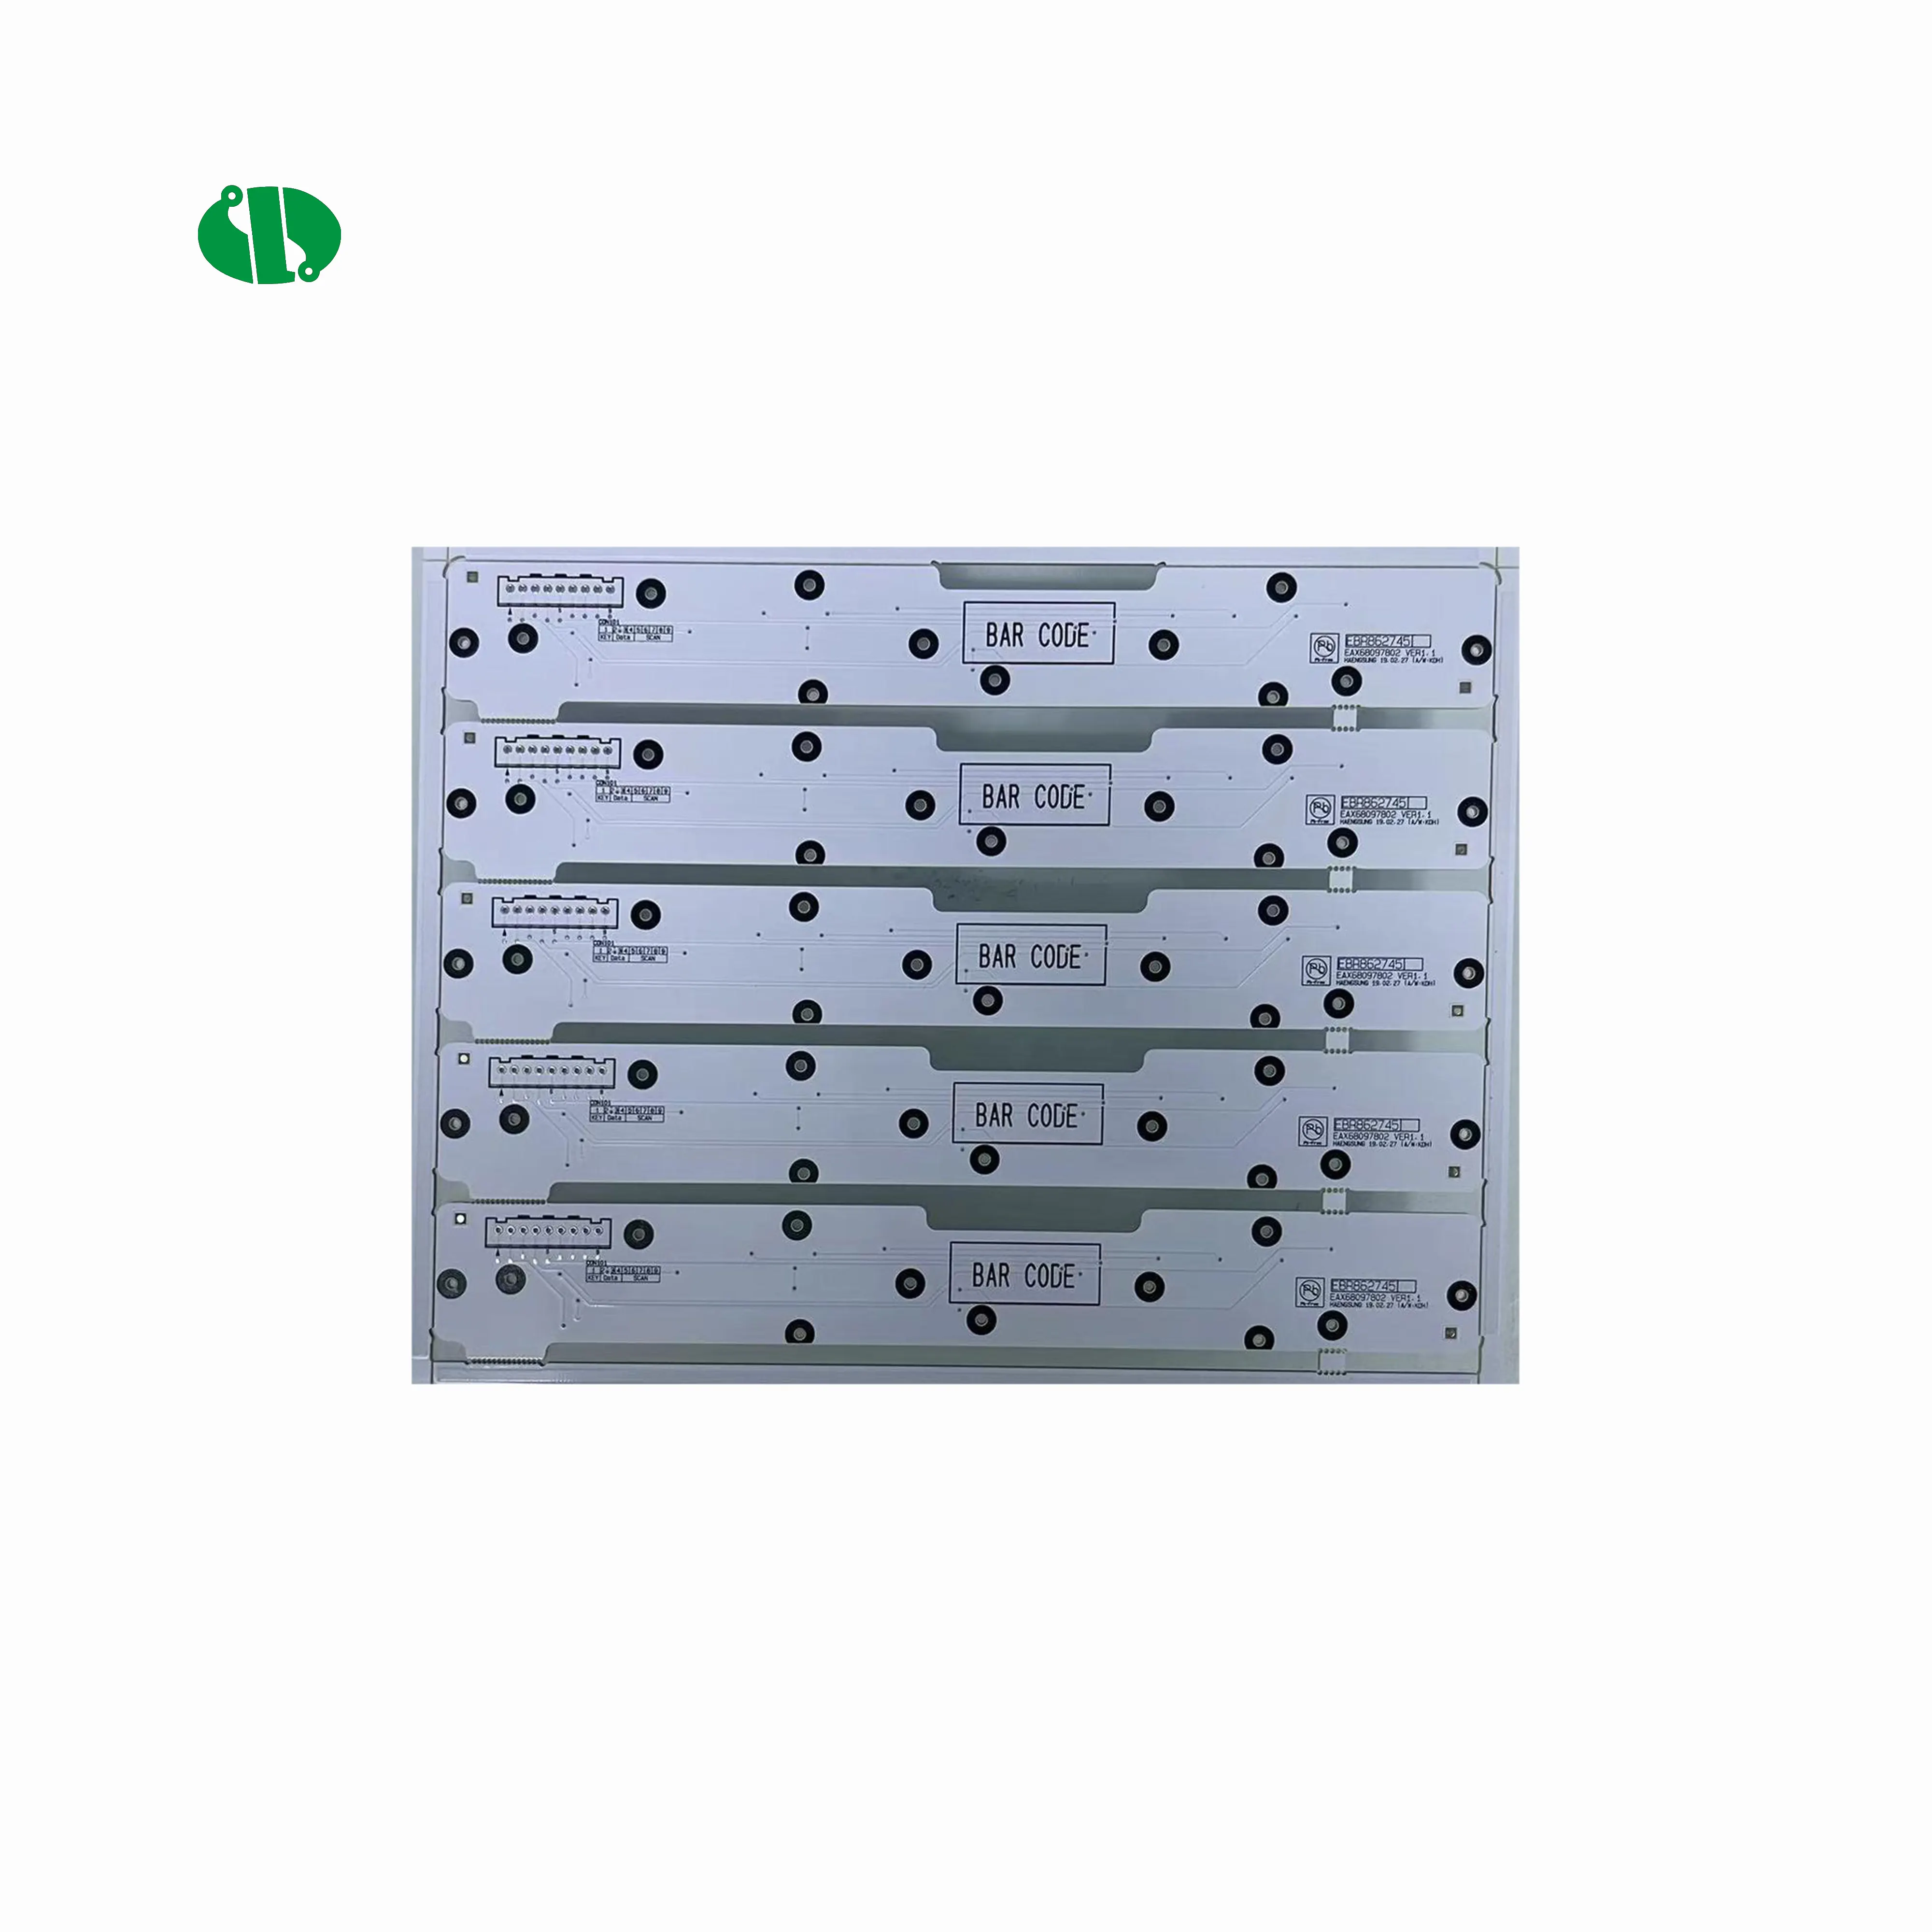 High Quality Television TV-2 Double-sided PCB Manufacturer in China PCB Board Manufacturer with PCB Assembly Service